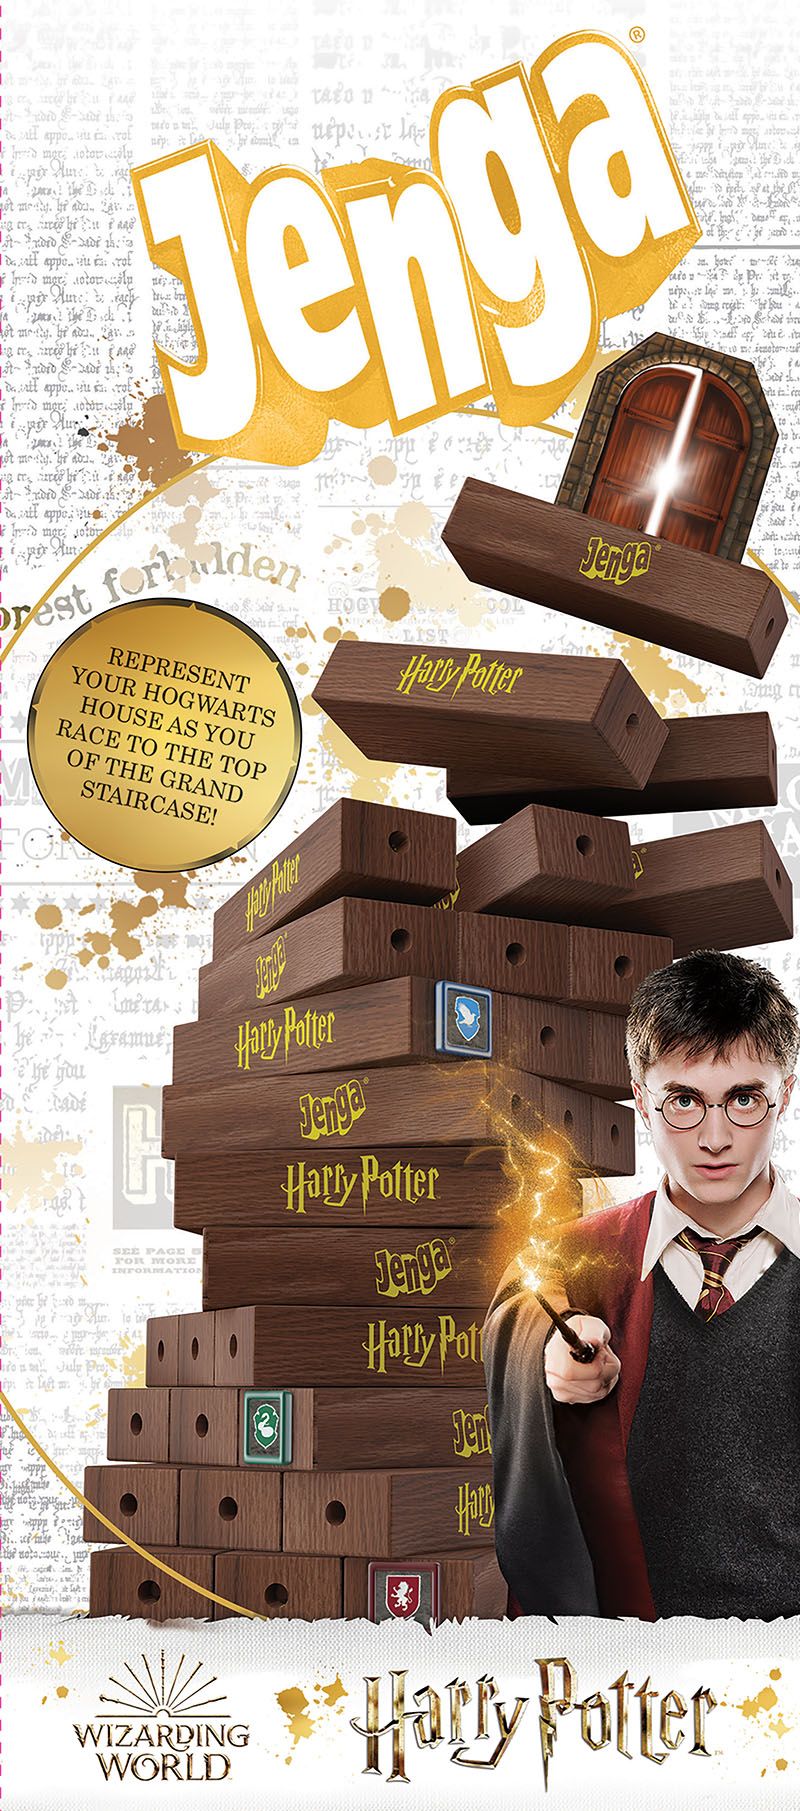 JENGA: Harry Potter | Build the Grand Staircase of Hogwarts